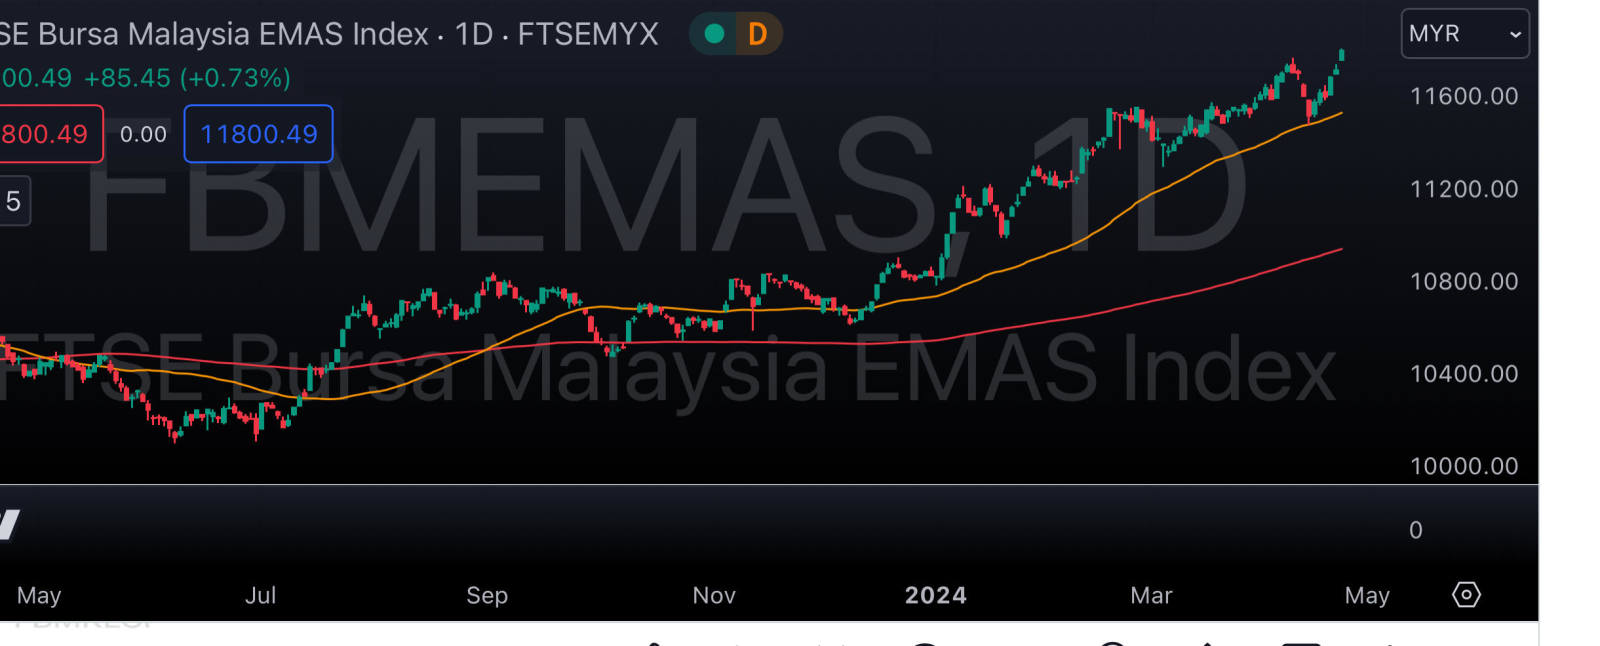 After last week's SHAKEOUT, KLCI has had six consecutive wins. This is the third time this year that it has been six consecutive years. Malaysian stocks have mo...